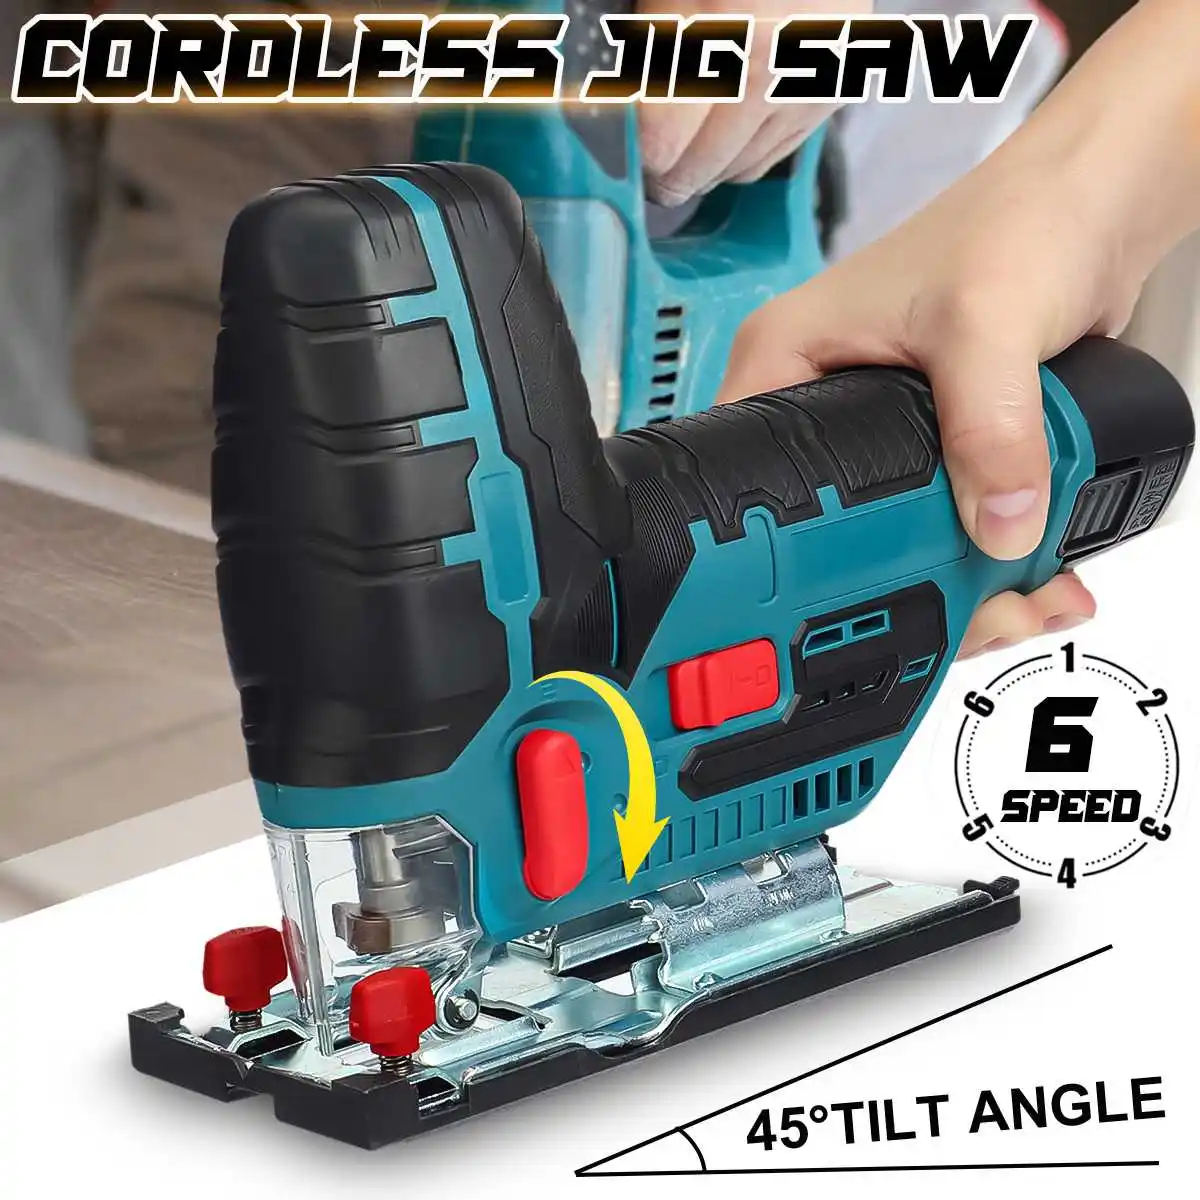 

12V 70mm 5600RPM Cordless Jig Saw Electric Jigsaw 6 Speed Adjustable Portable Woodworking Power Tool 45 Degree Tilt Angle